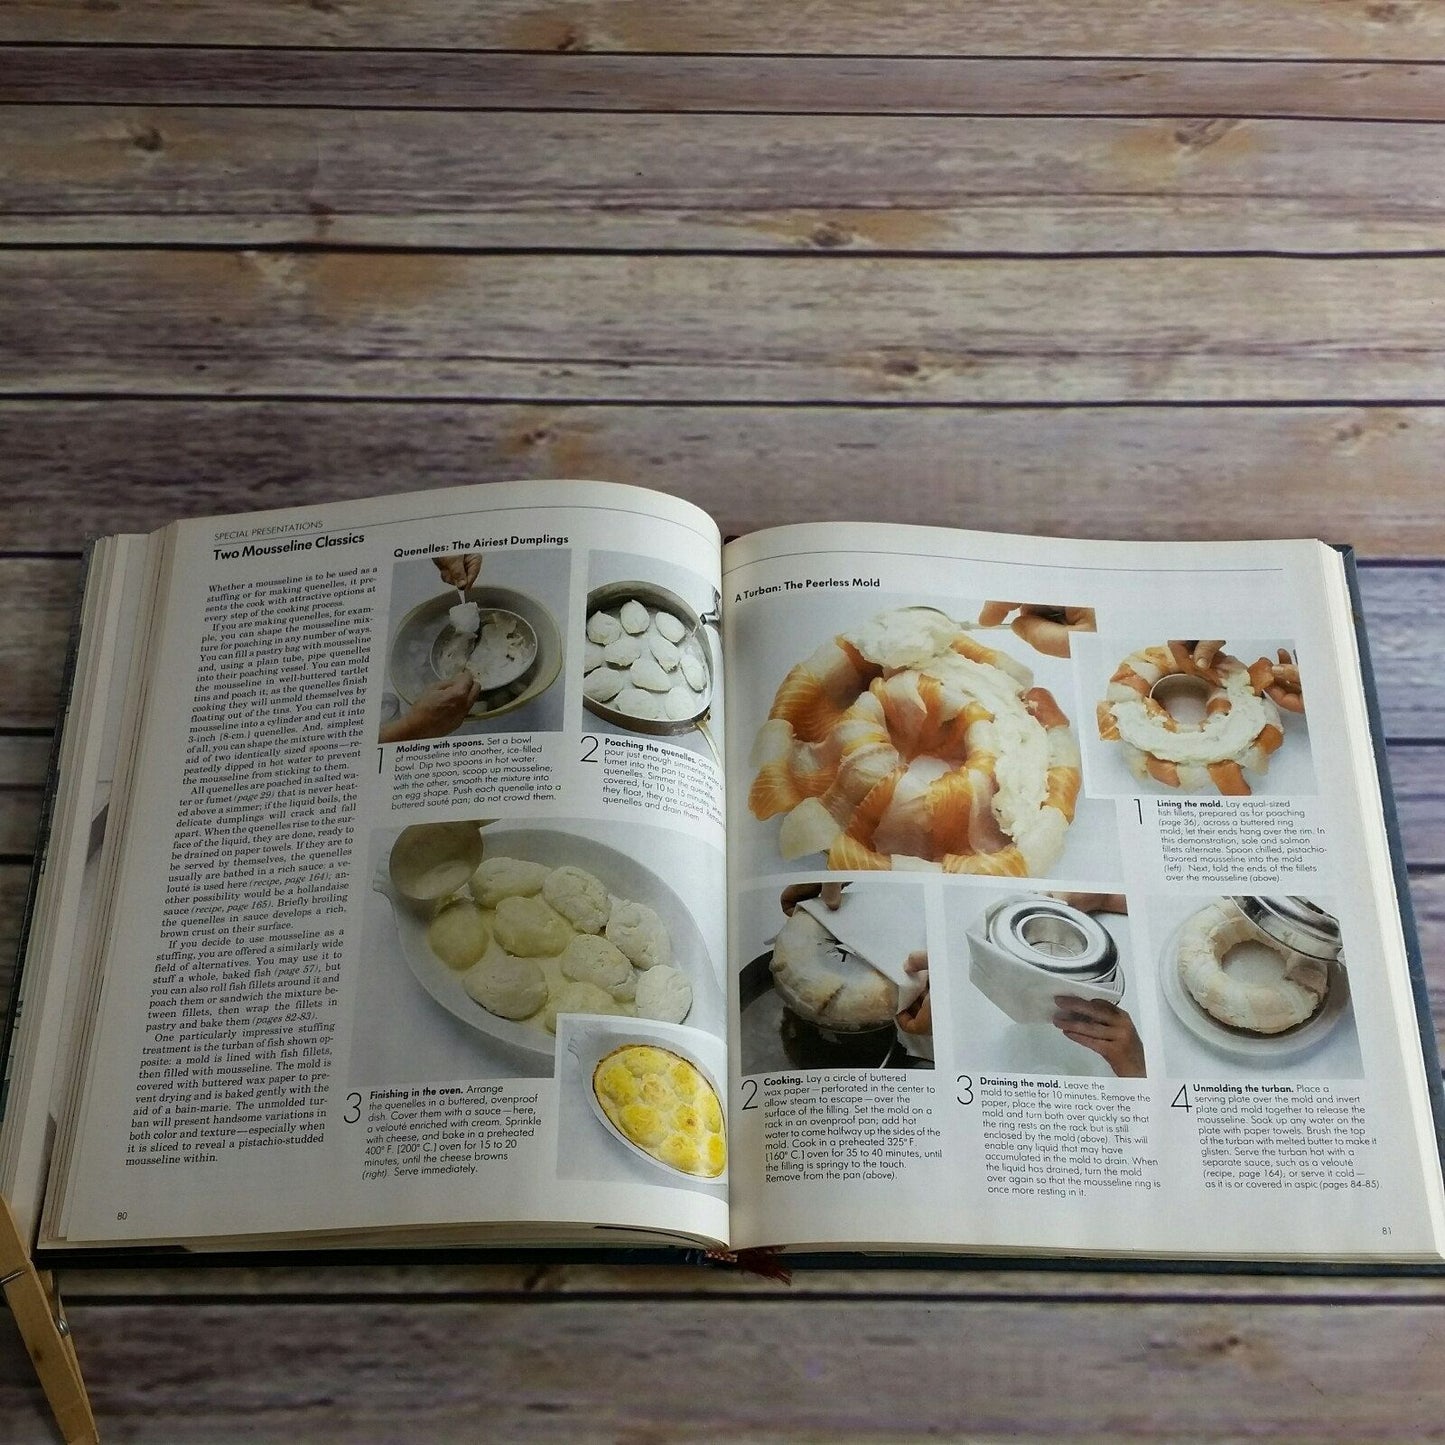 Vintage Cookbook Fish Time Life Books The Good Cook Techniques and Recipes 1979 Hardcover Poaching Stewing Frying Baking Broiling